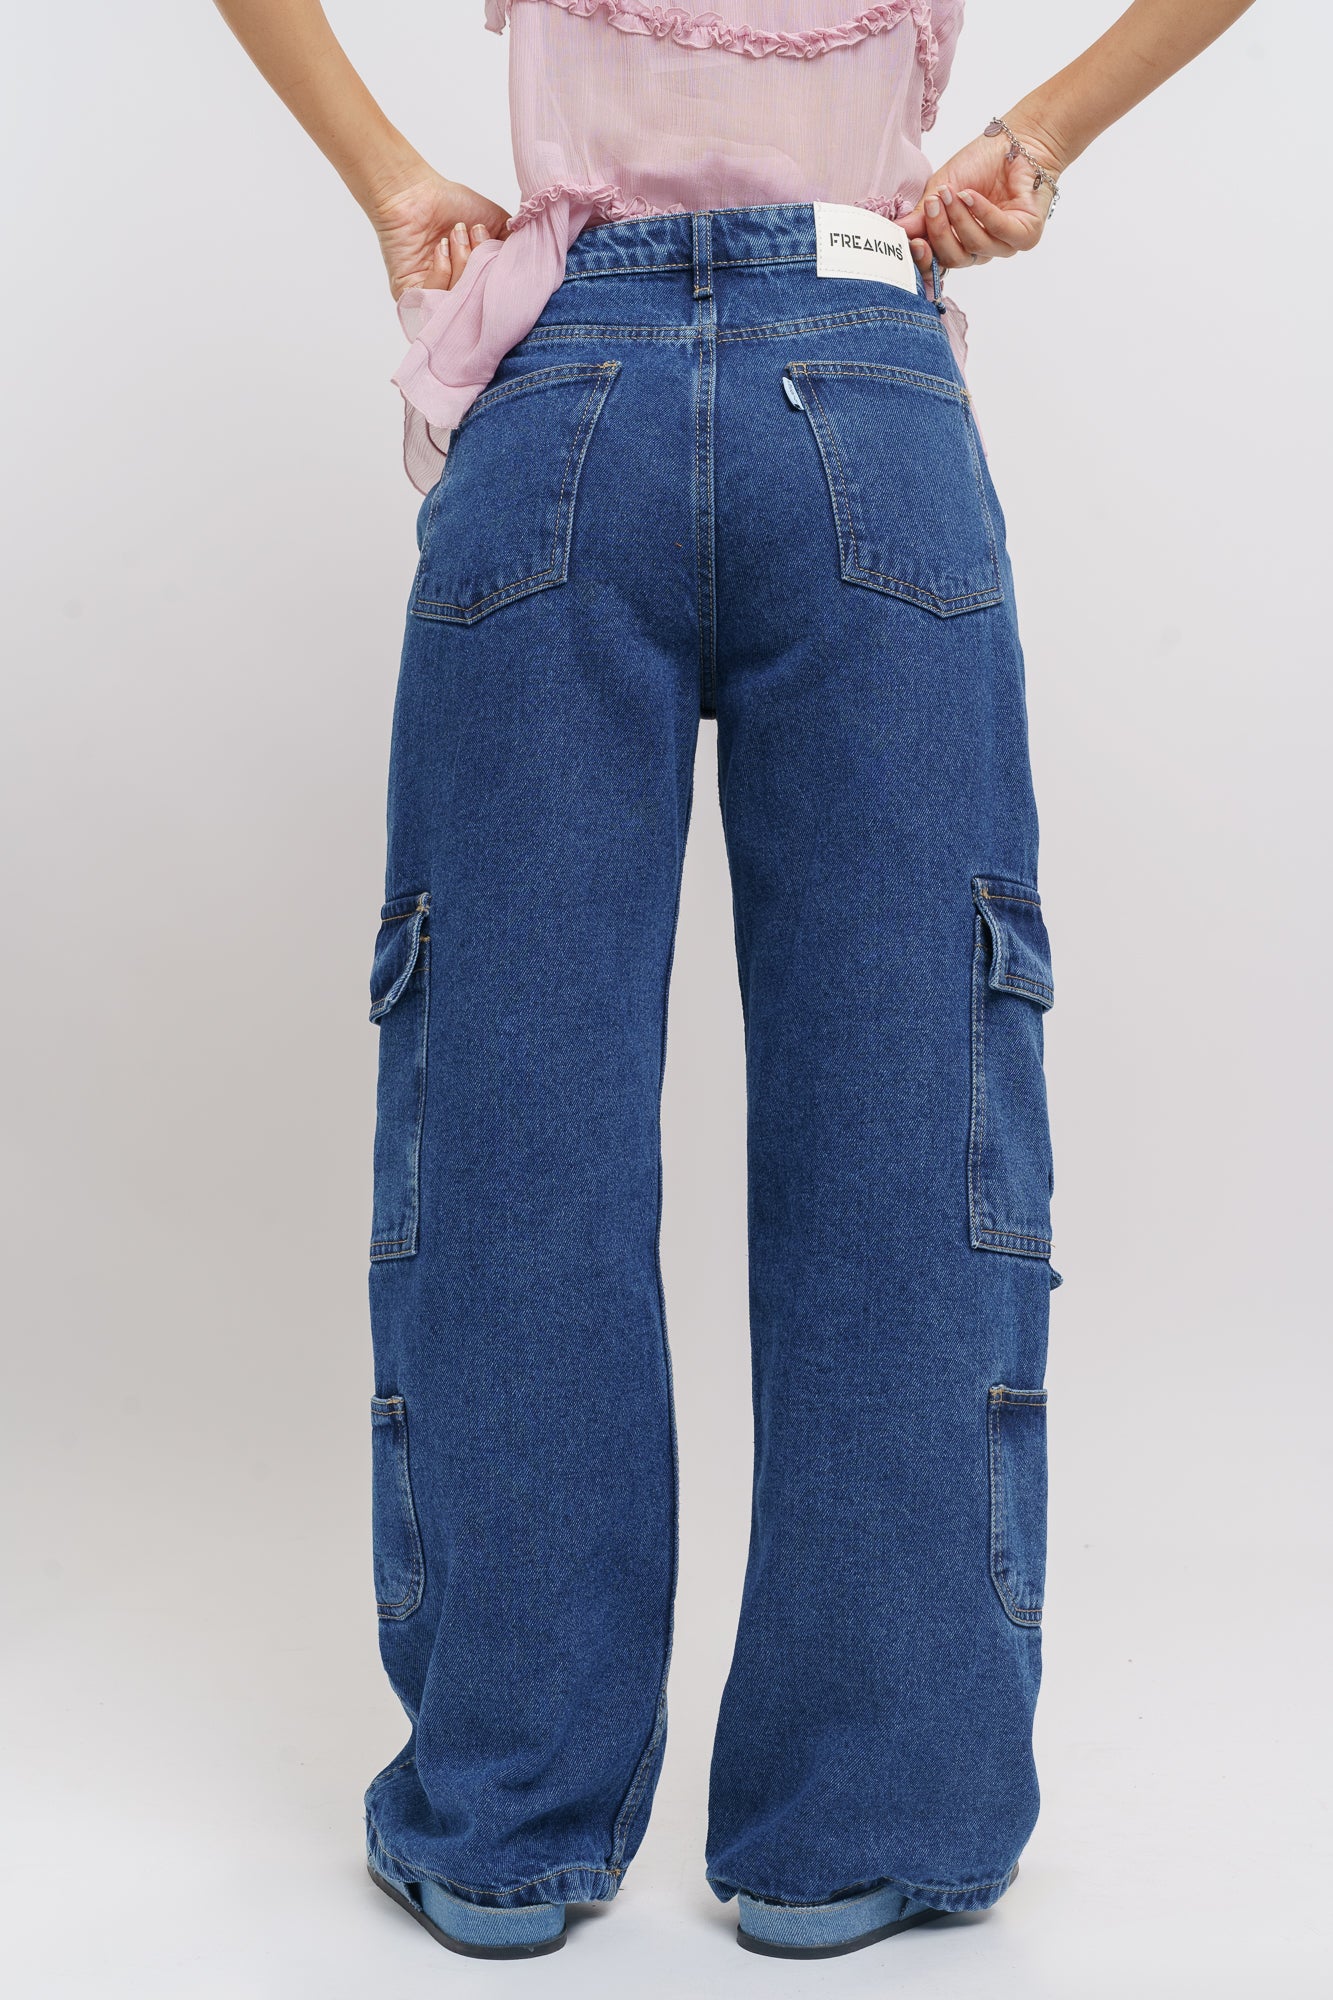 Women's High Rise Stretch Bootcut Jeans in Medium Vintage